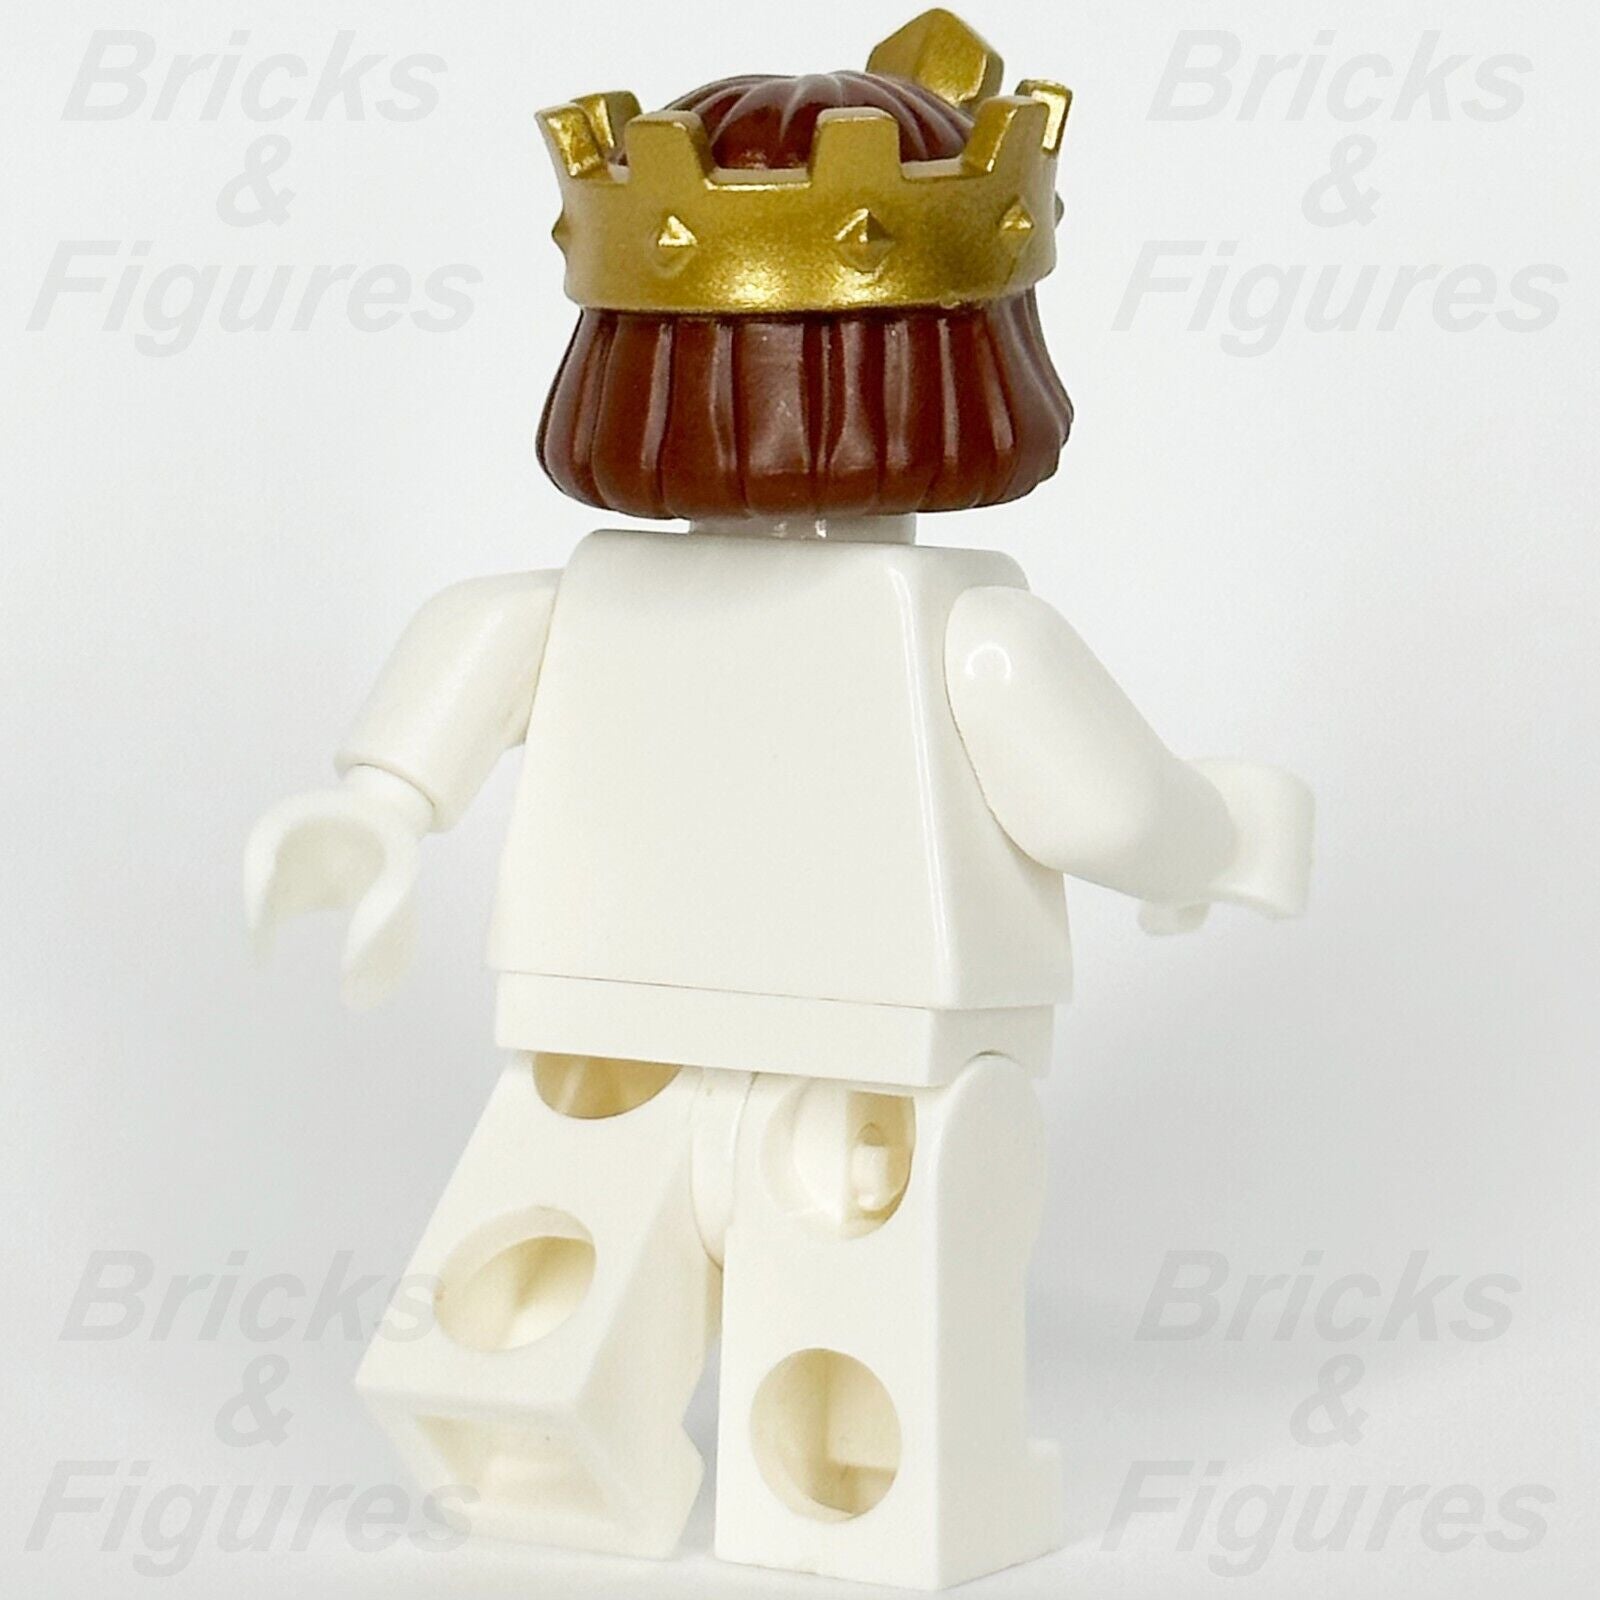 LEGO Castle Gold Crown with Reddish Brown Hair Minifigure Part 18835pb01 King 5